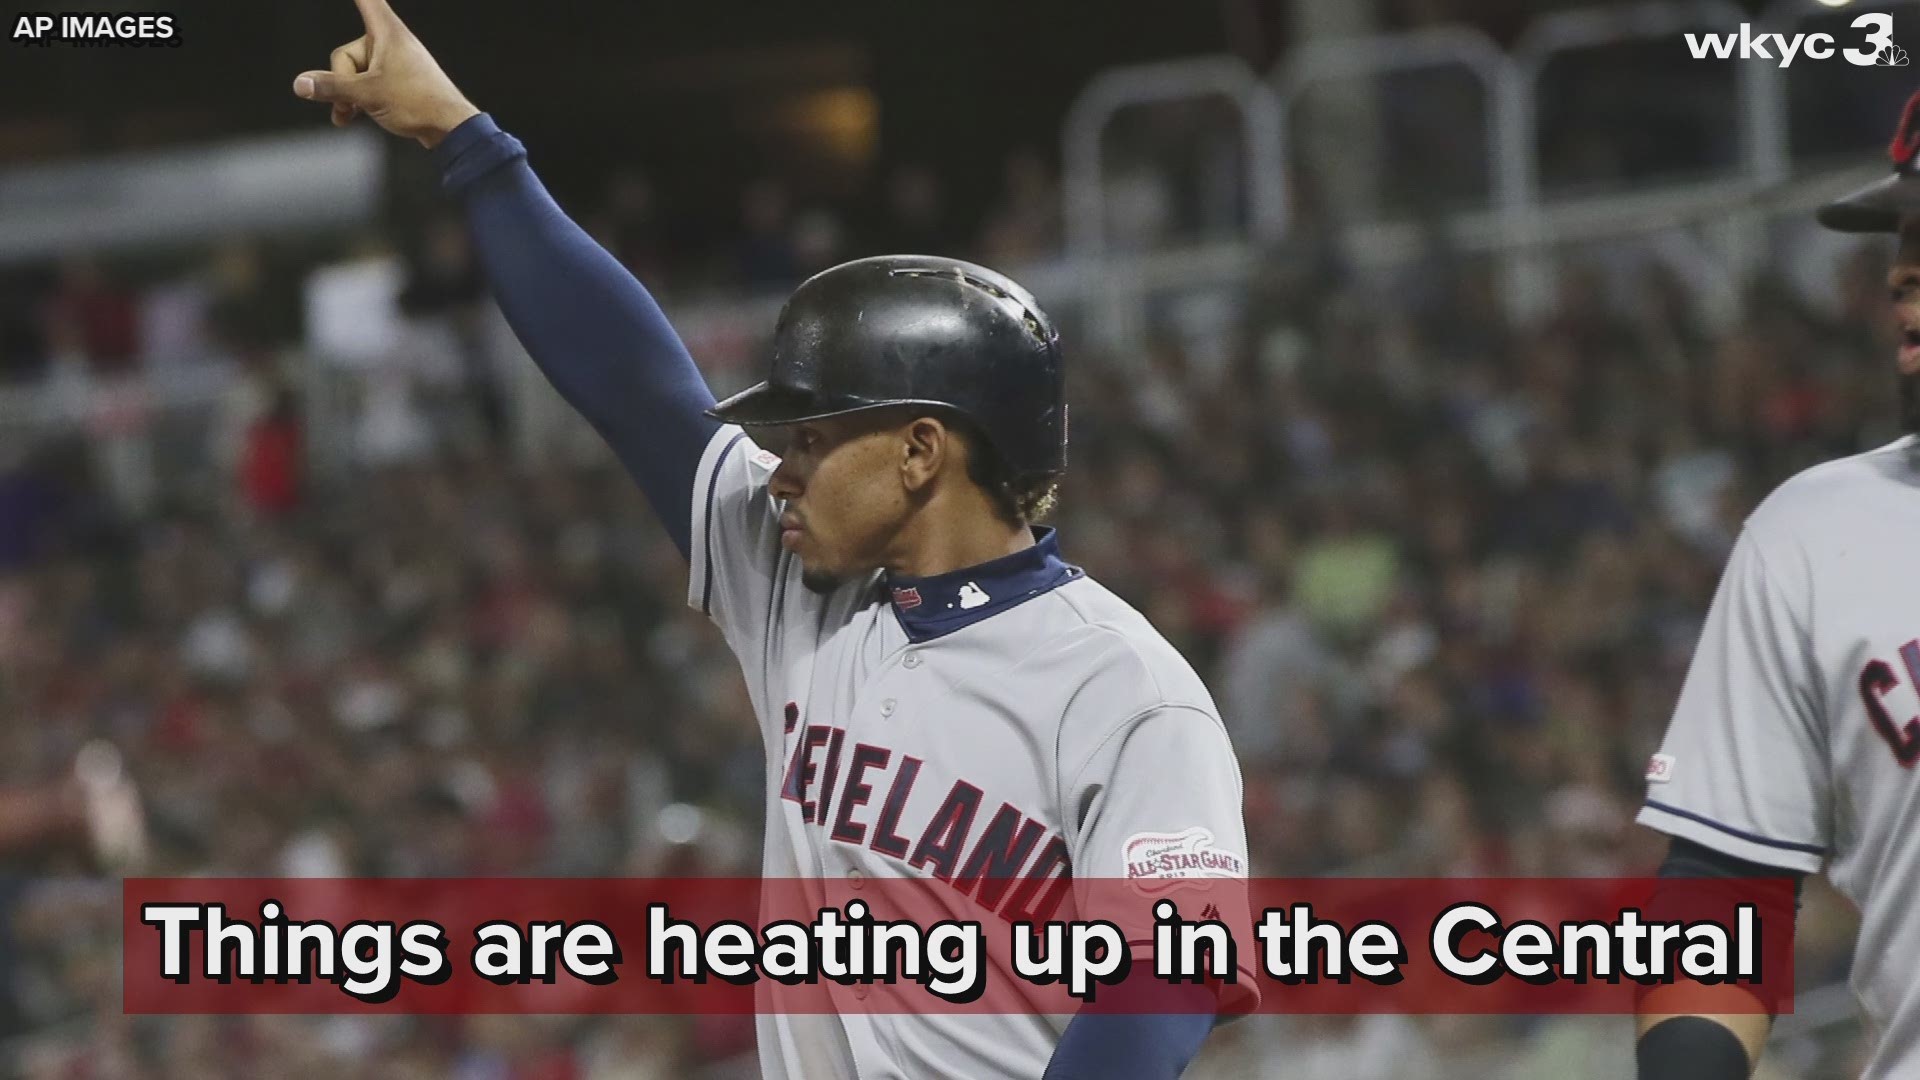 On Friday, the Cleveland Indians will face the Minnesota Twins with first place in the American League Central division on the line.